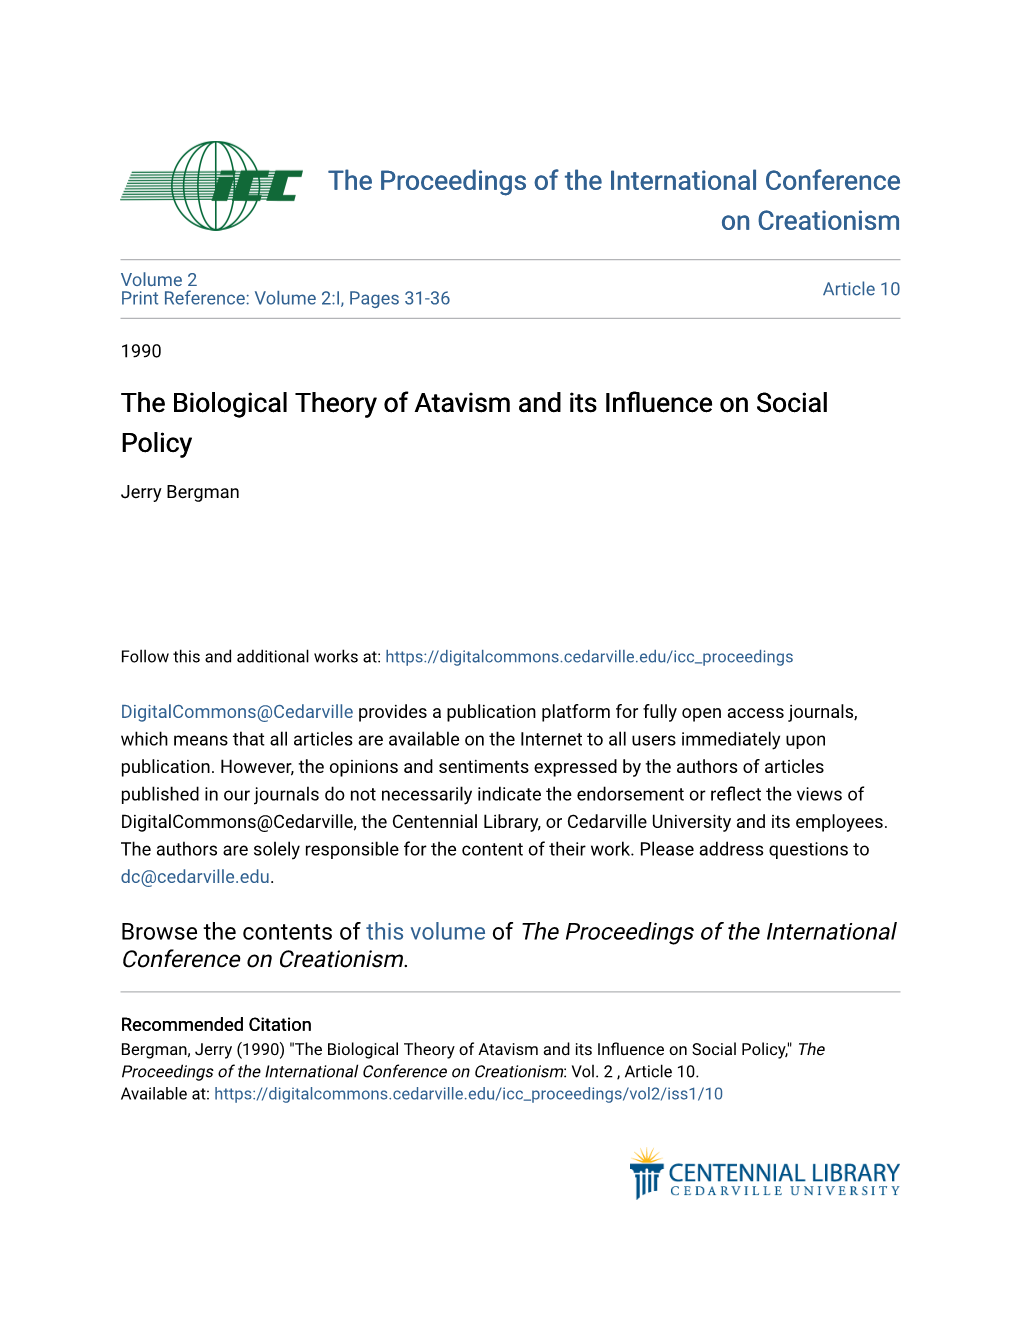 The Biological Theory of Atavism and Its Influence on Social Policy